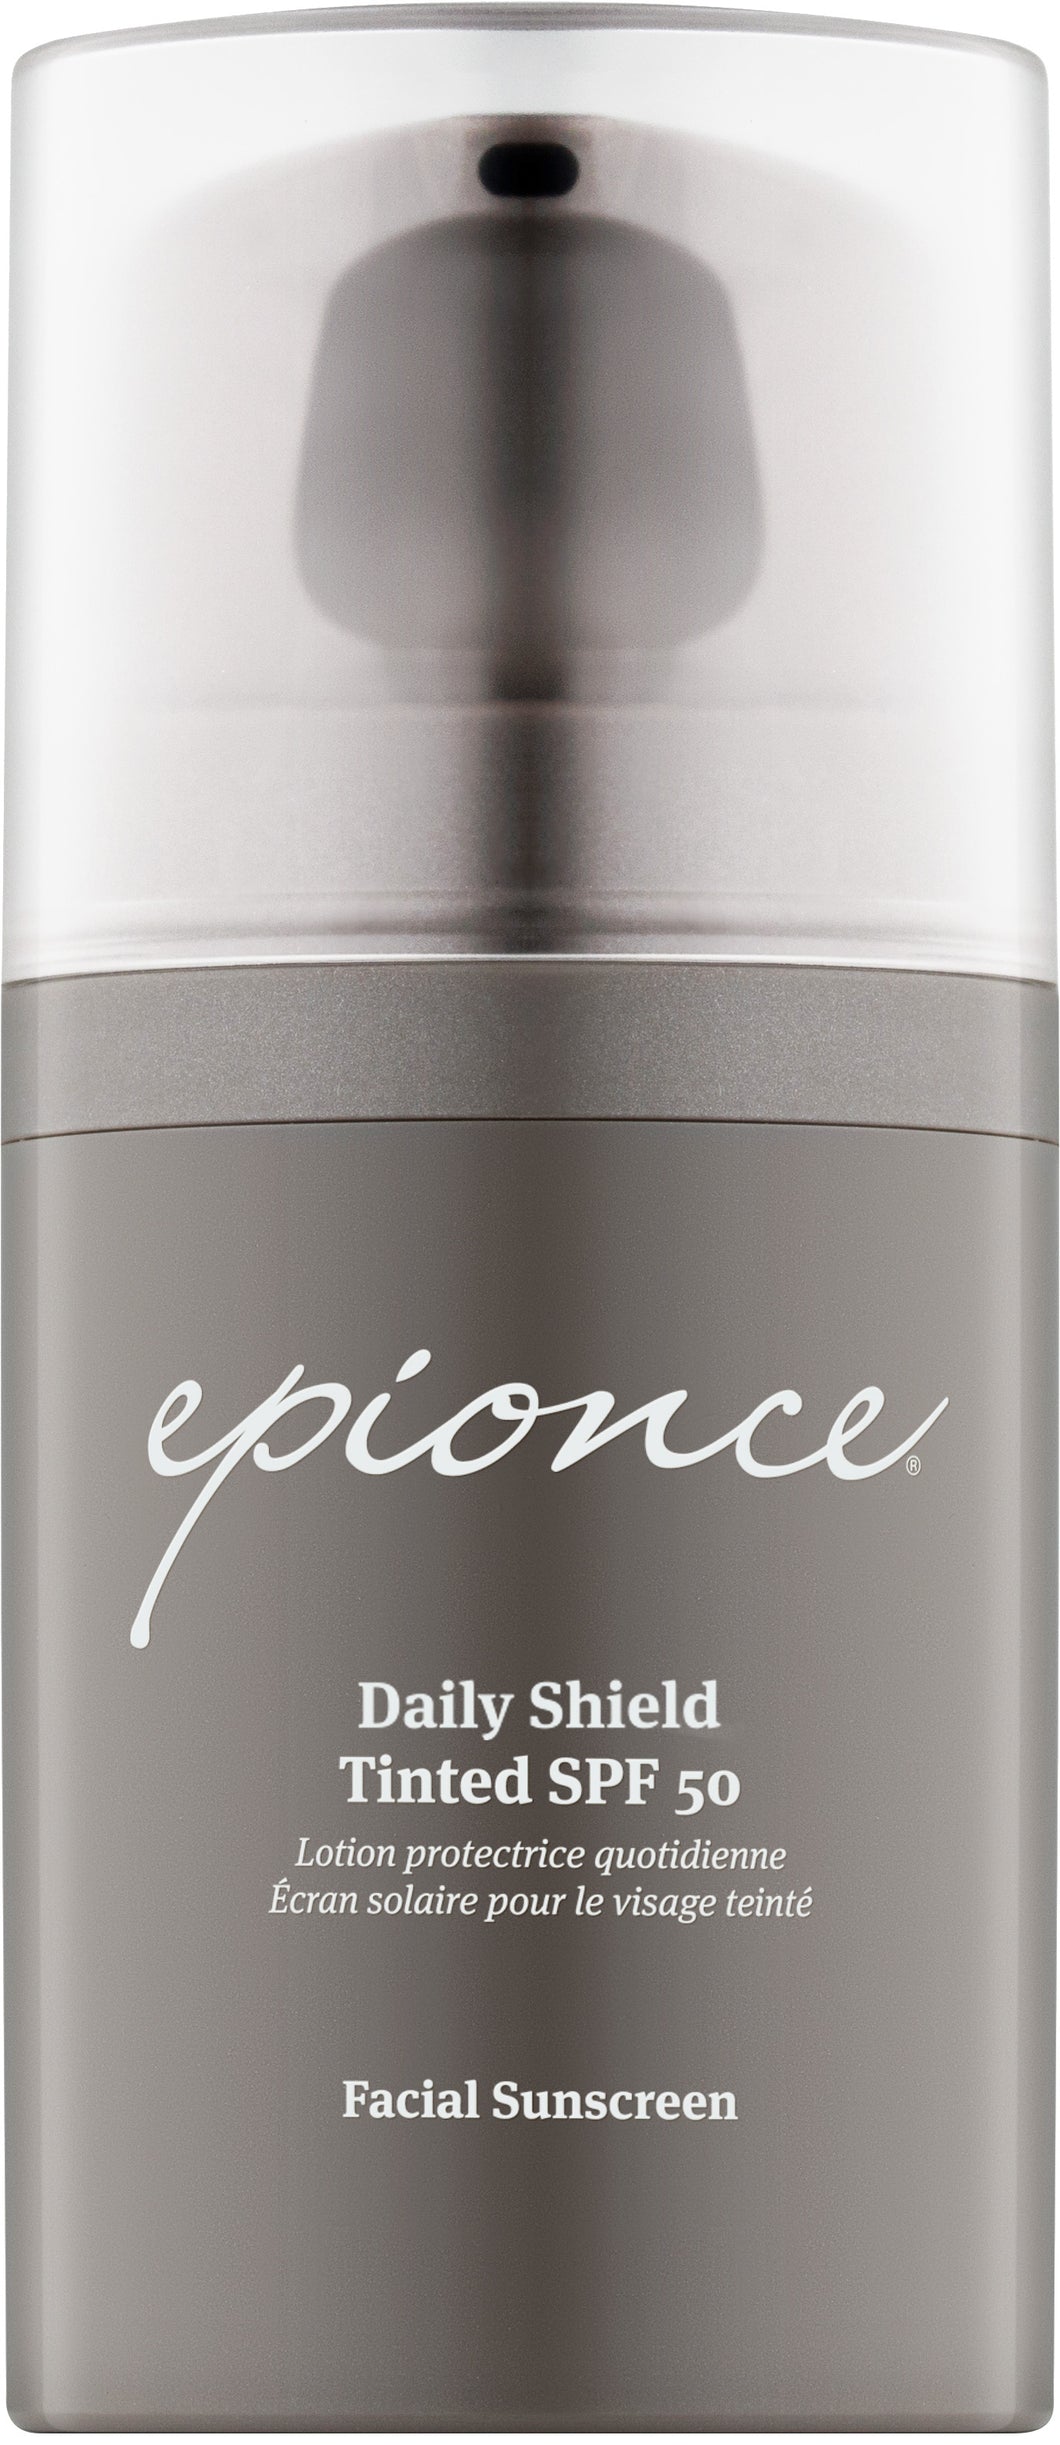 Epionce Daily Shield Tinted SPF 50 - 50ml